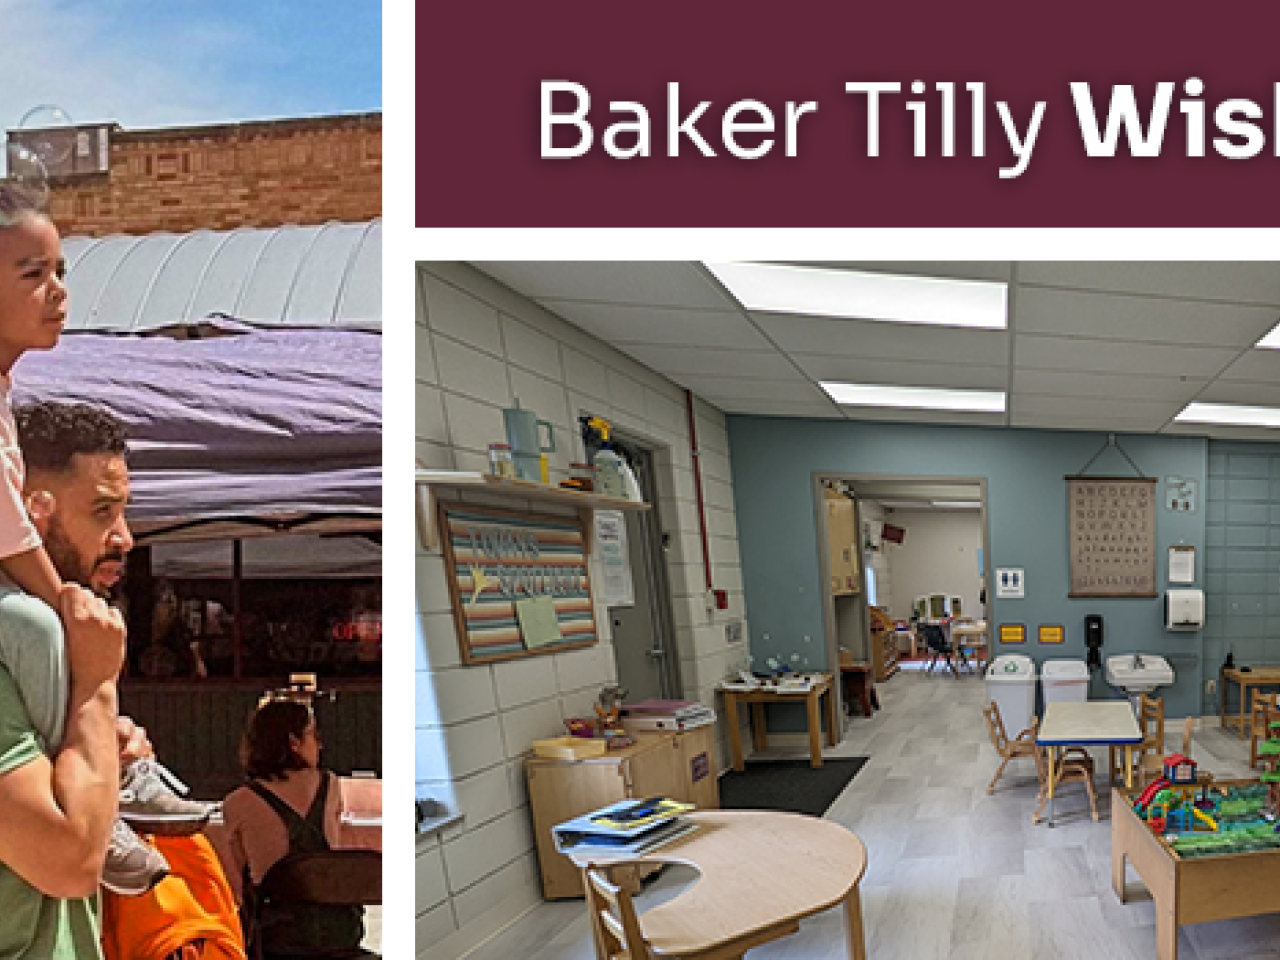 Collage of a child on an adults' shoulders, "Baker Tilly Wishes", and a room with low tables and toys.